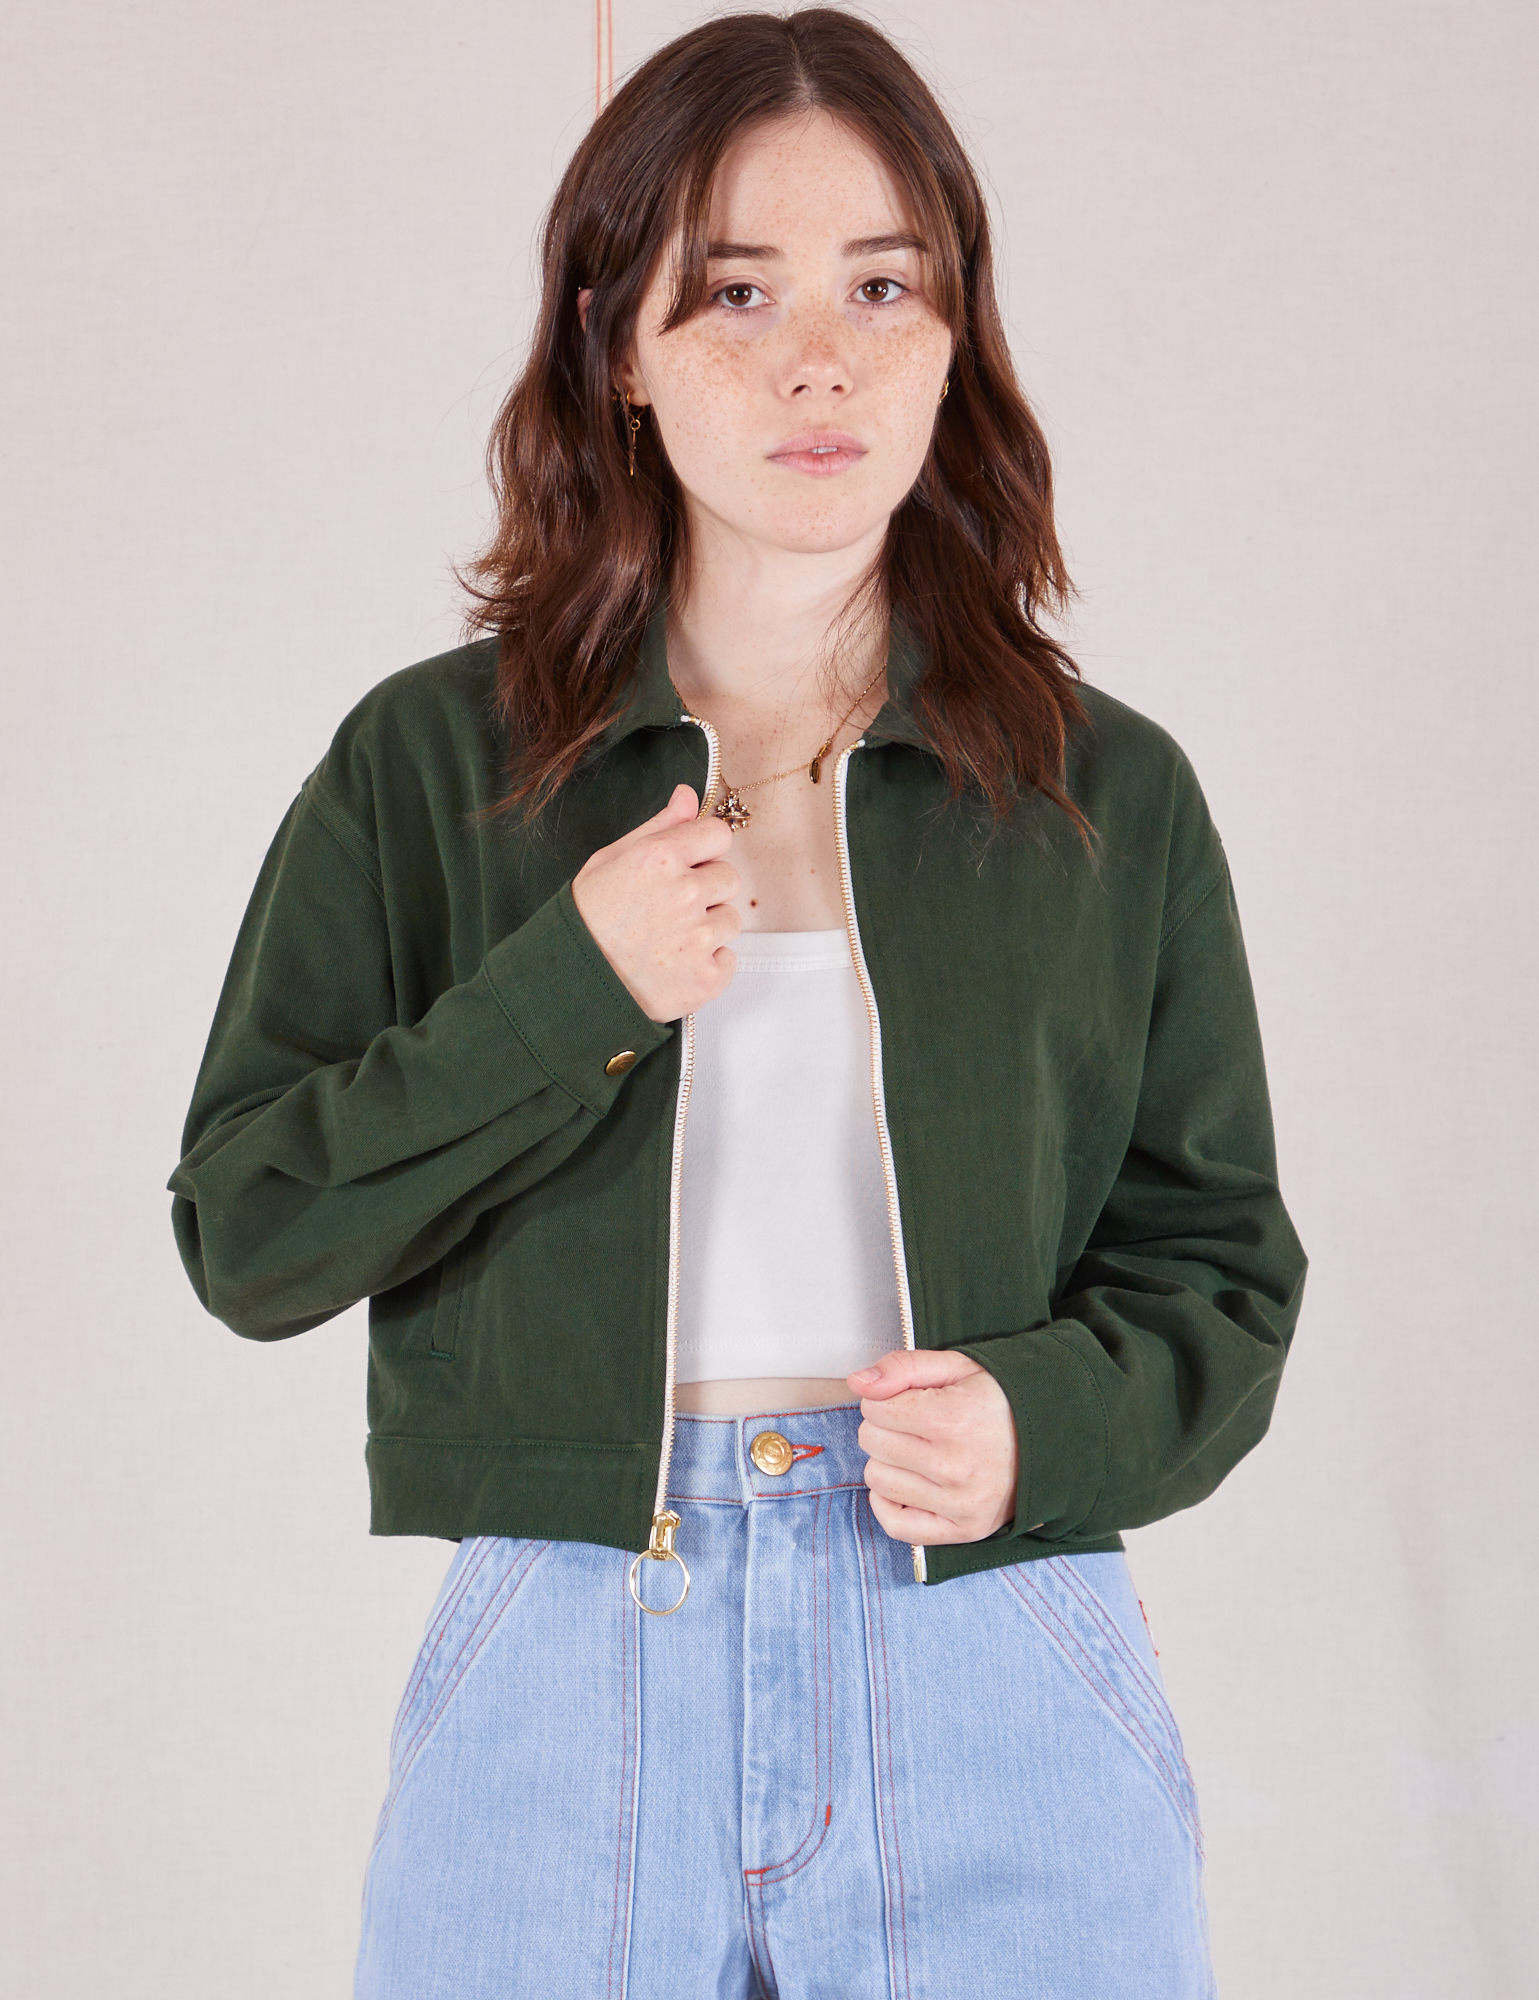 Hana is wearing Ricky Jacket in Swamp Green with a vintage off-white tee Cami underneath